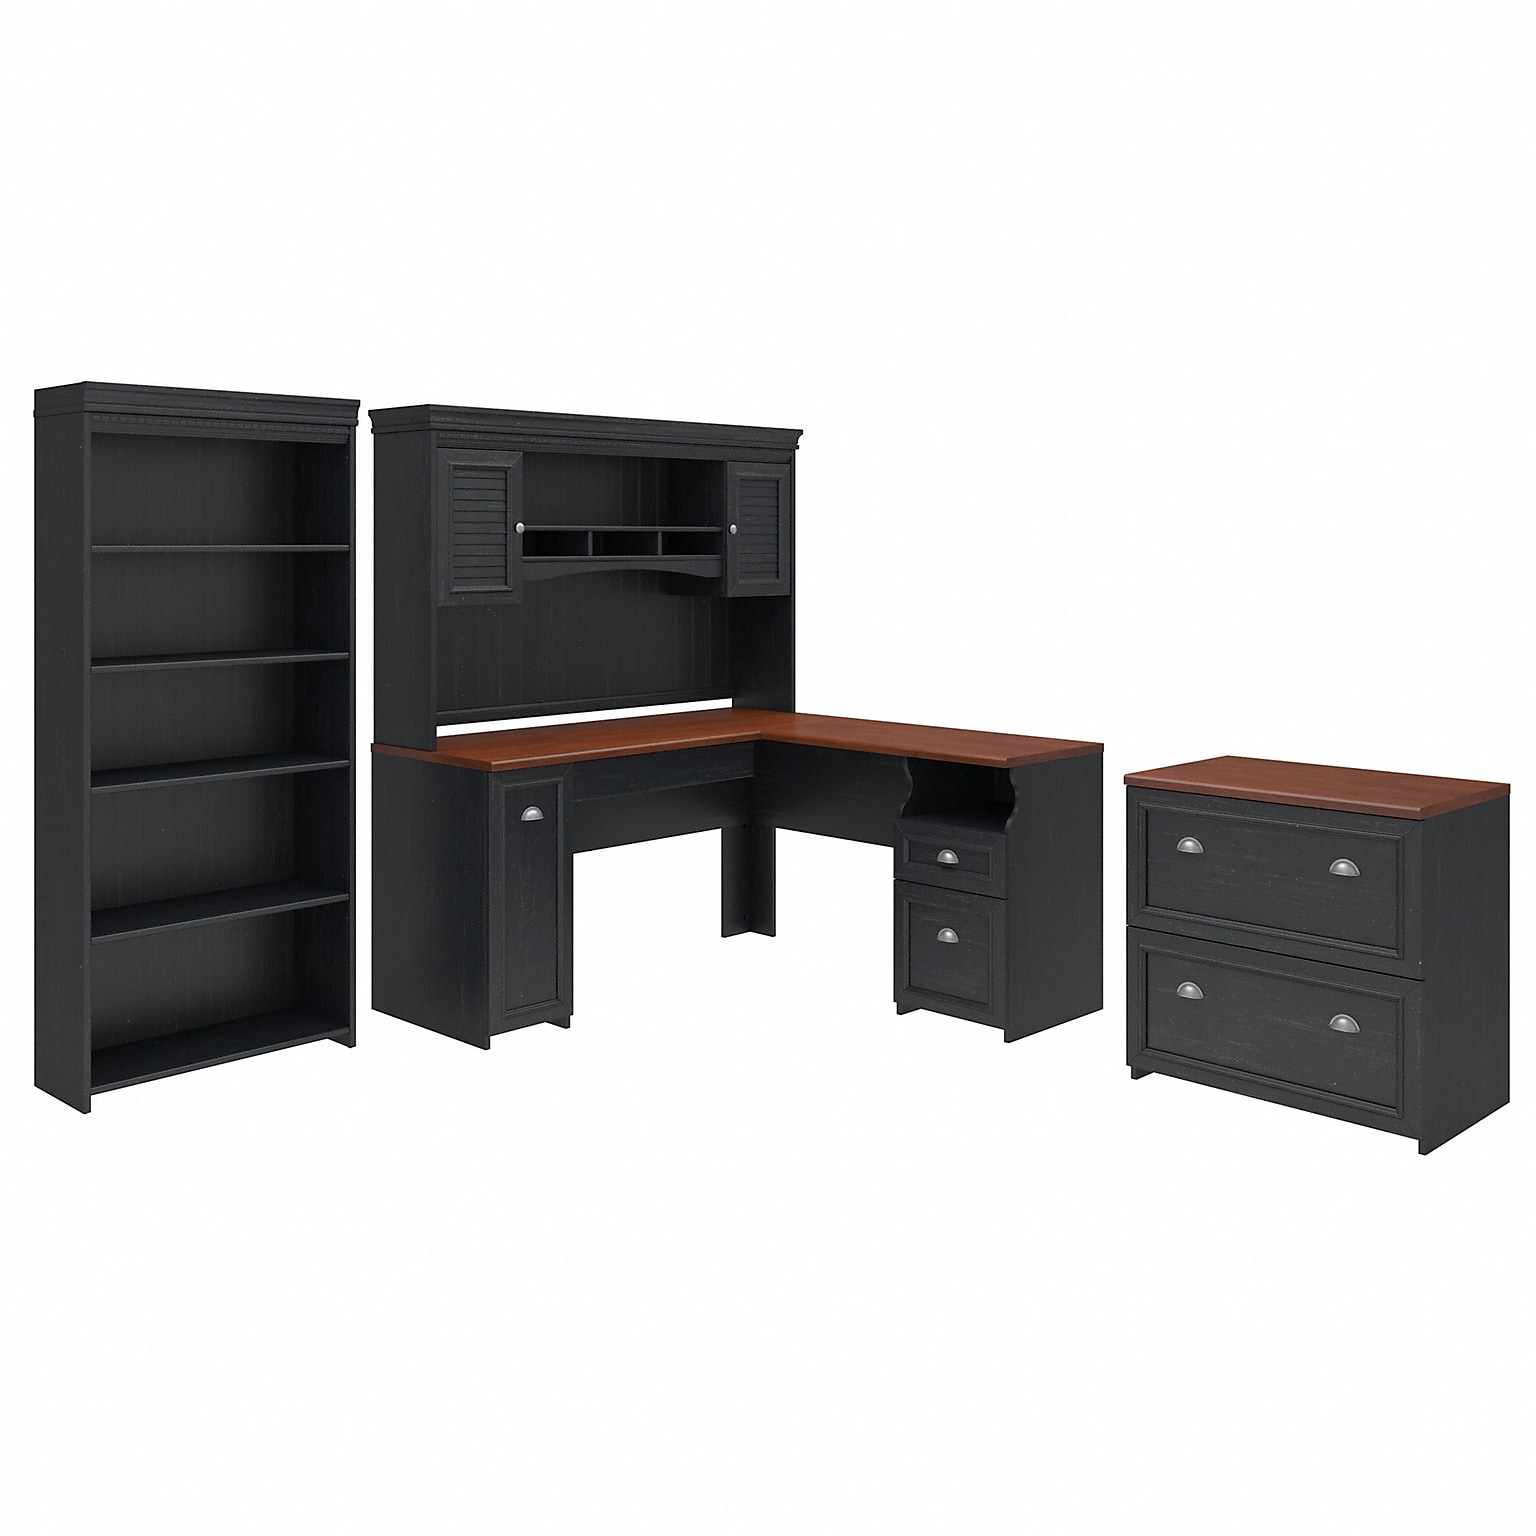 Bush Furniture Fairview 60 W L Shaped Desk with Hutch, Bookcase and Lateral File Cabinet Bundle, Antique Black (FV006AB)